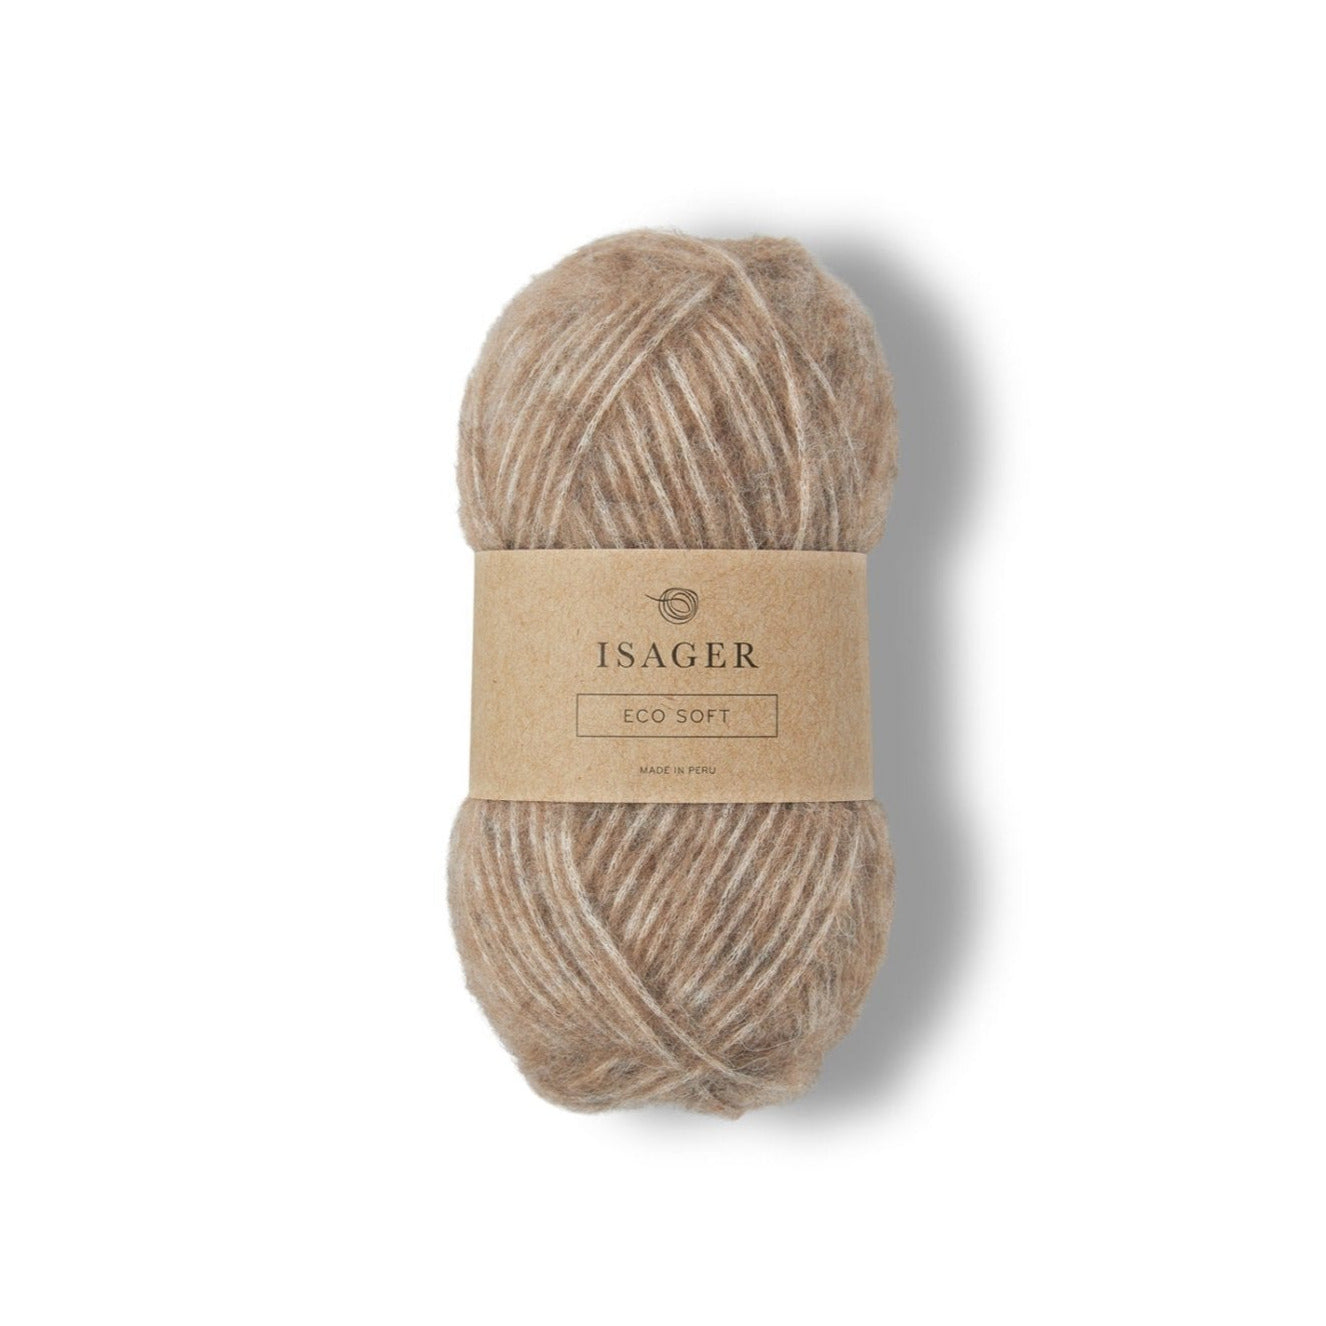 Isager Eco Soft - E7s - 8 Ply - Alpaca - The Little Yarn Store